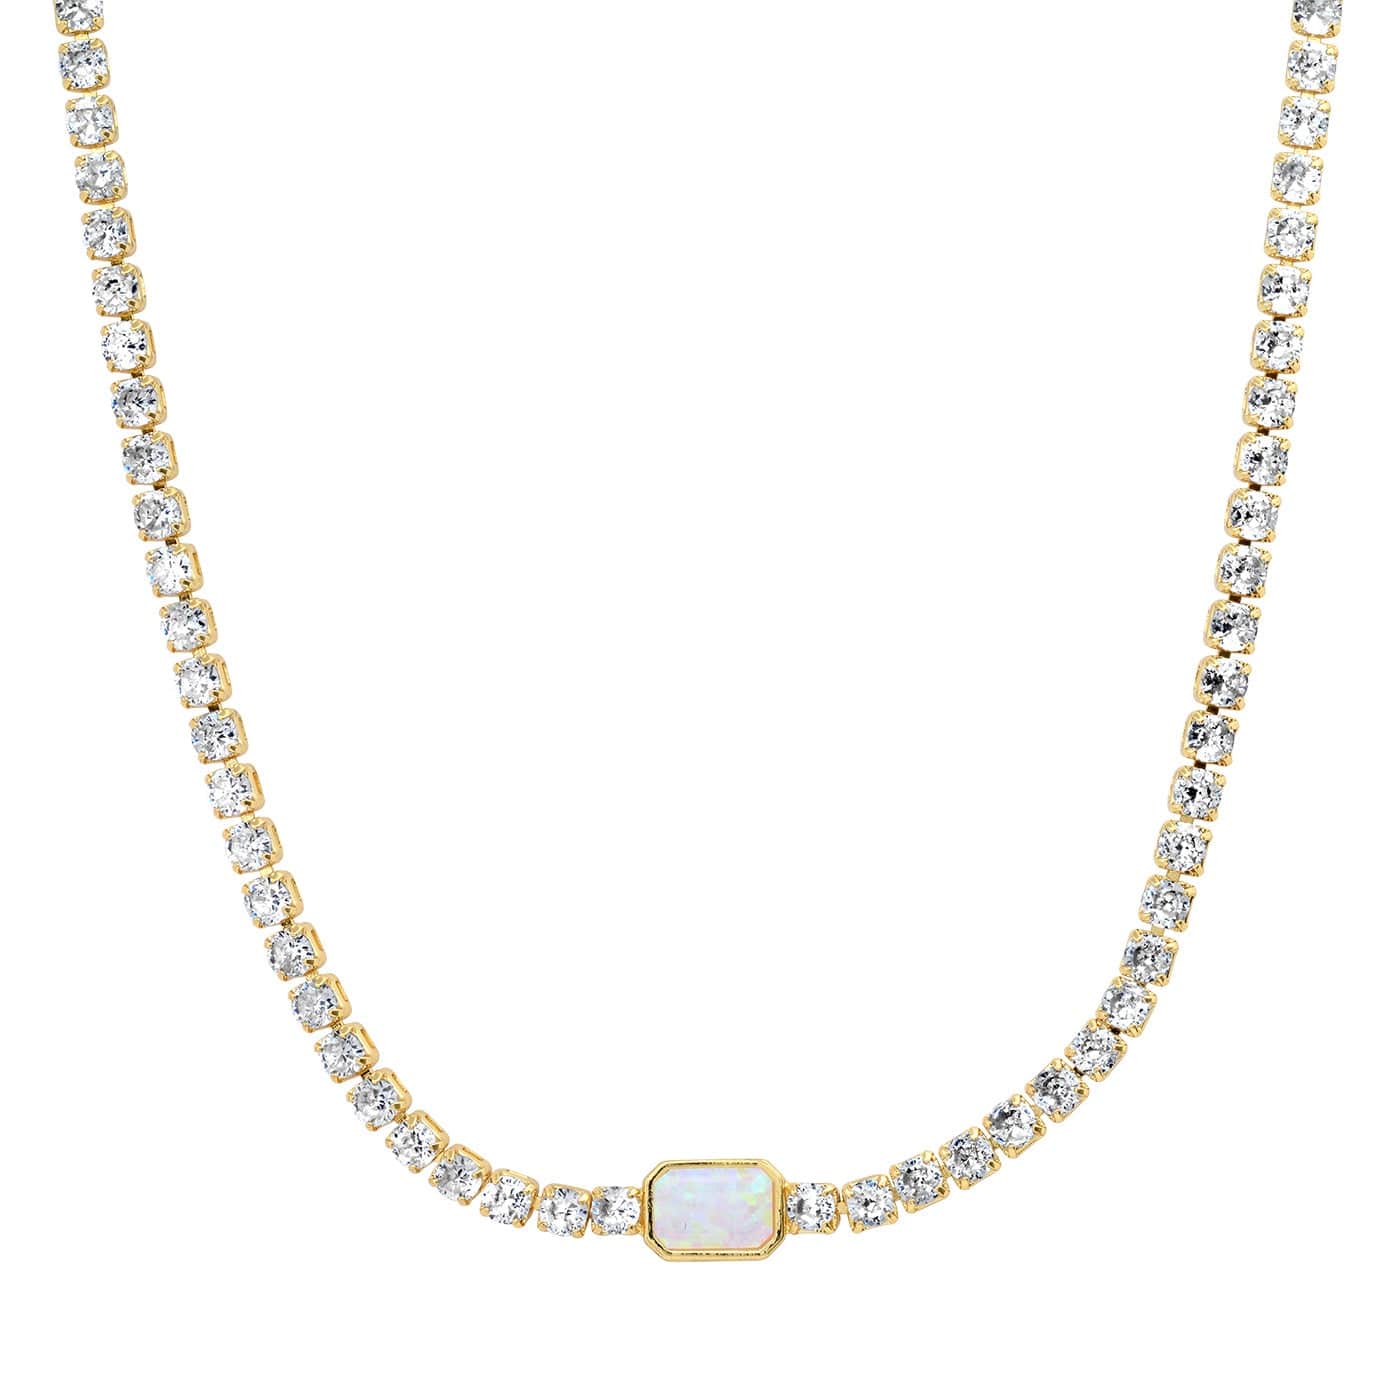 TAI JEWELRY Necklace Opal Tennis Necklace With Center Stone